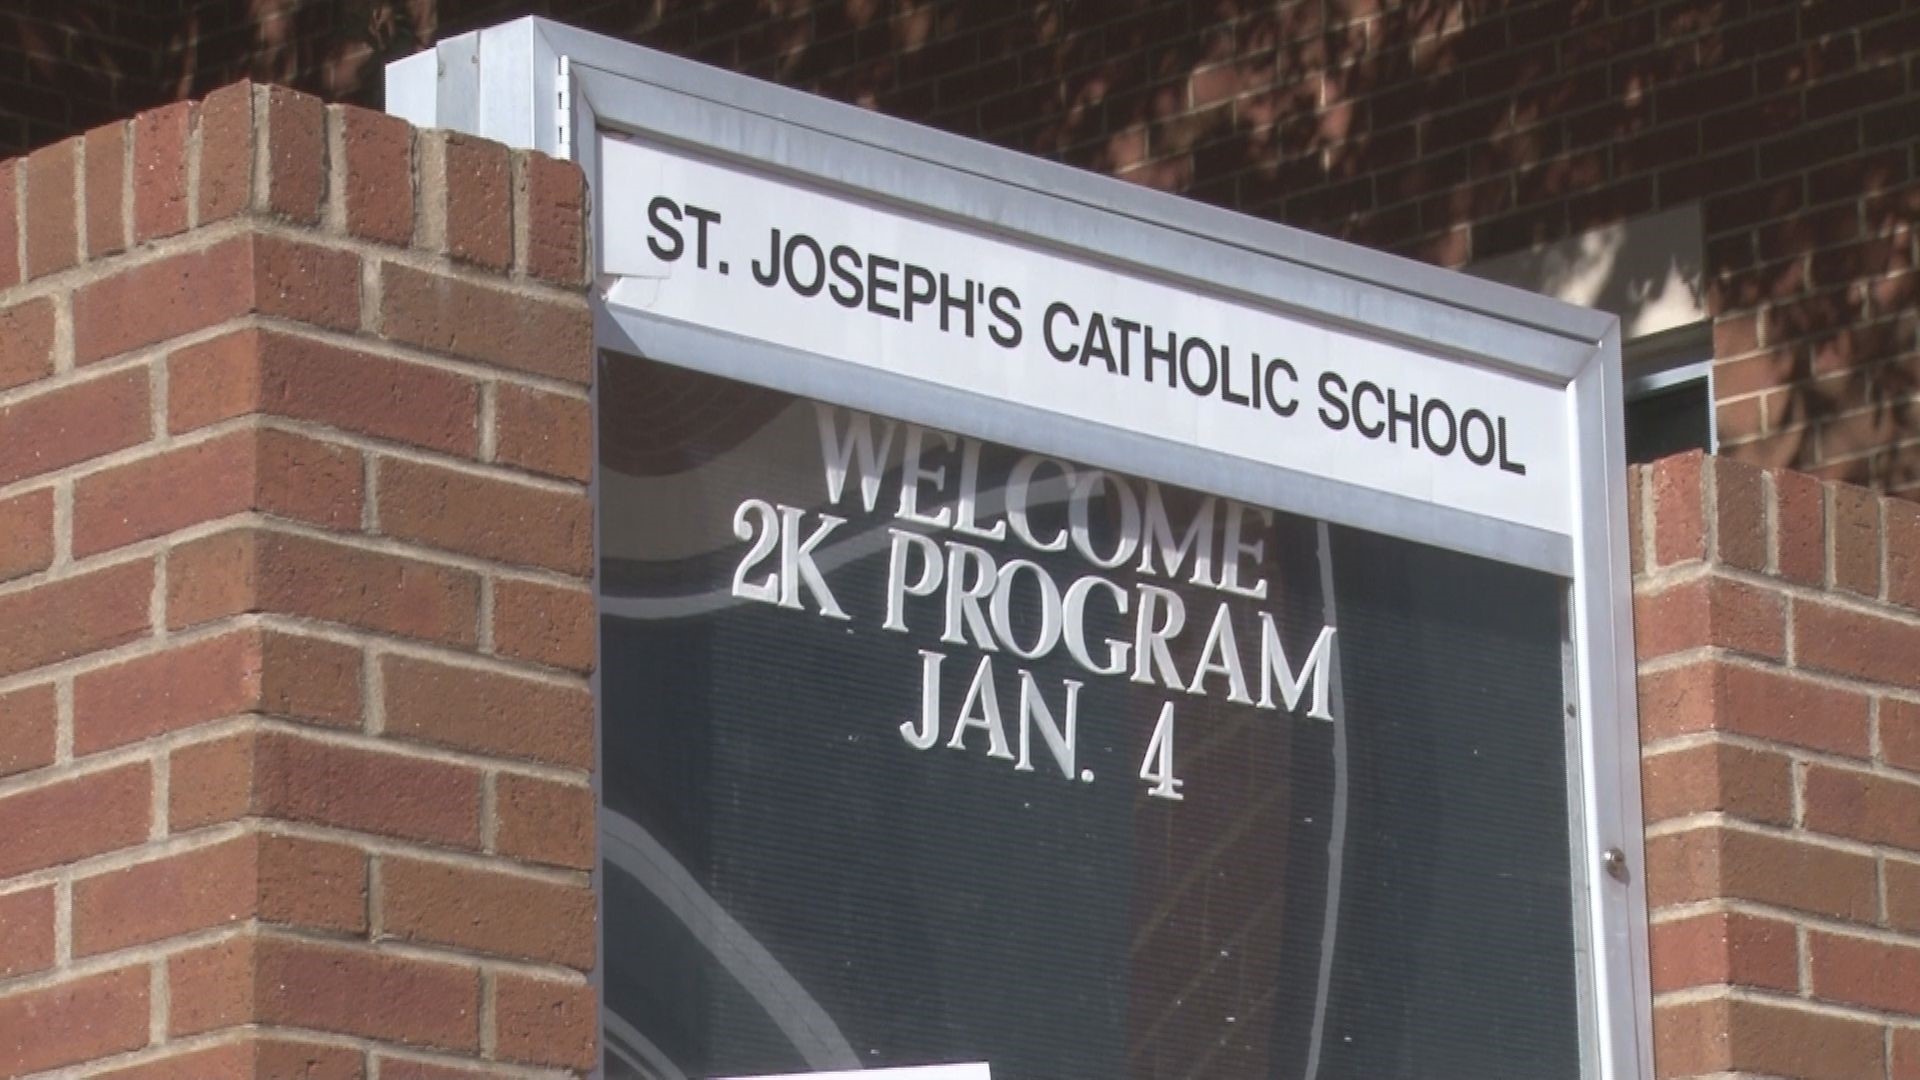 St. Joseph's Catholic School is one of the the only private schools in Macon to offer an accredited 2-K program.